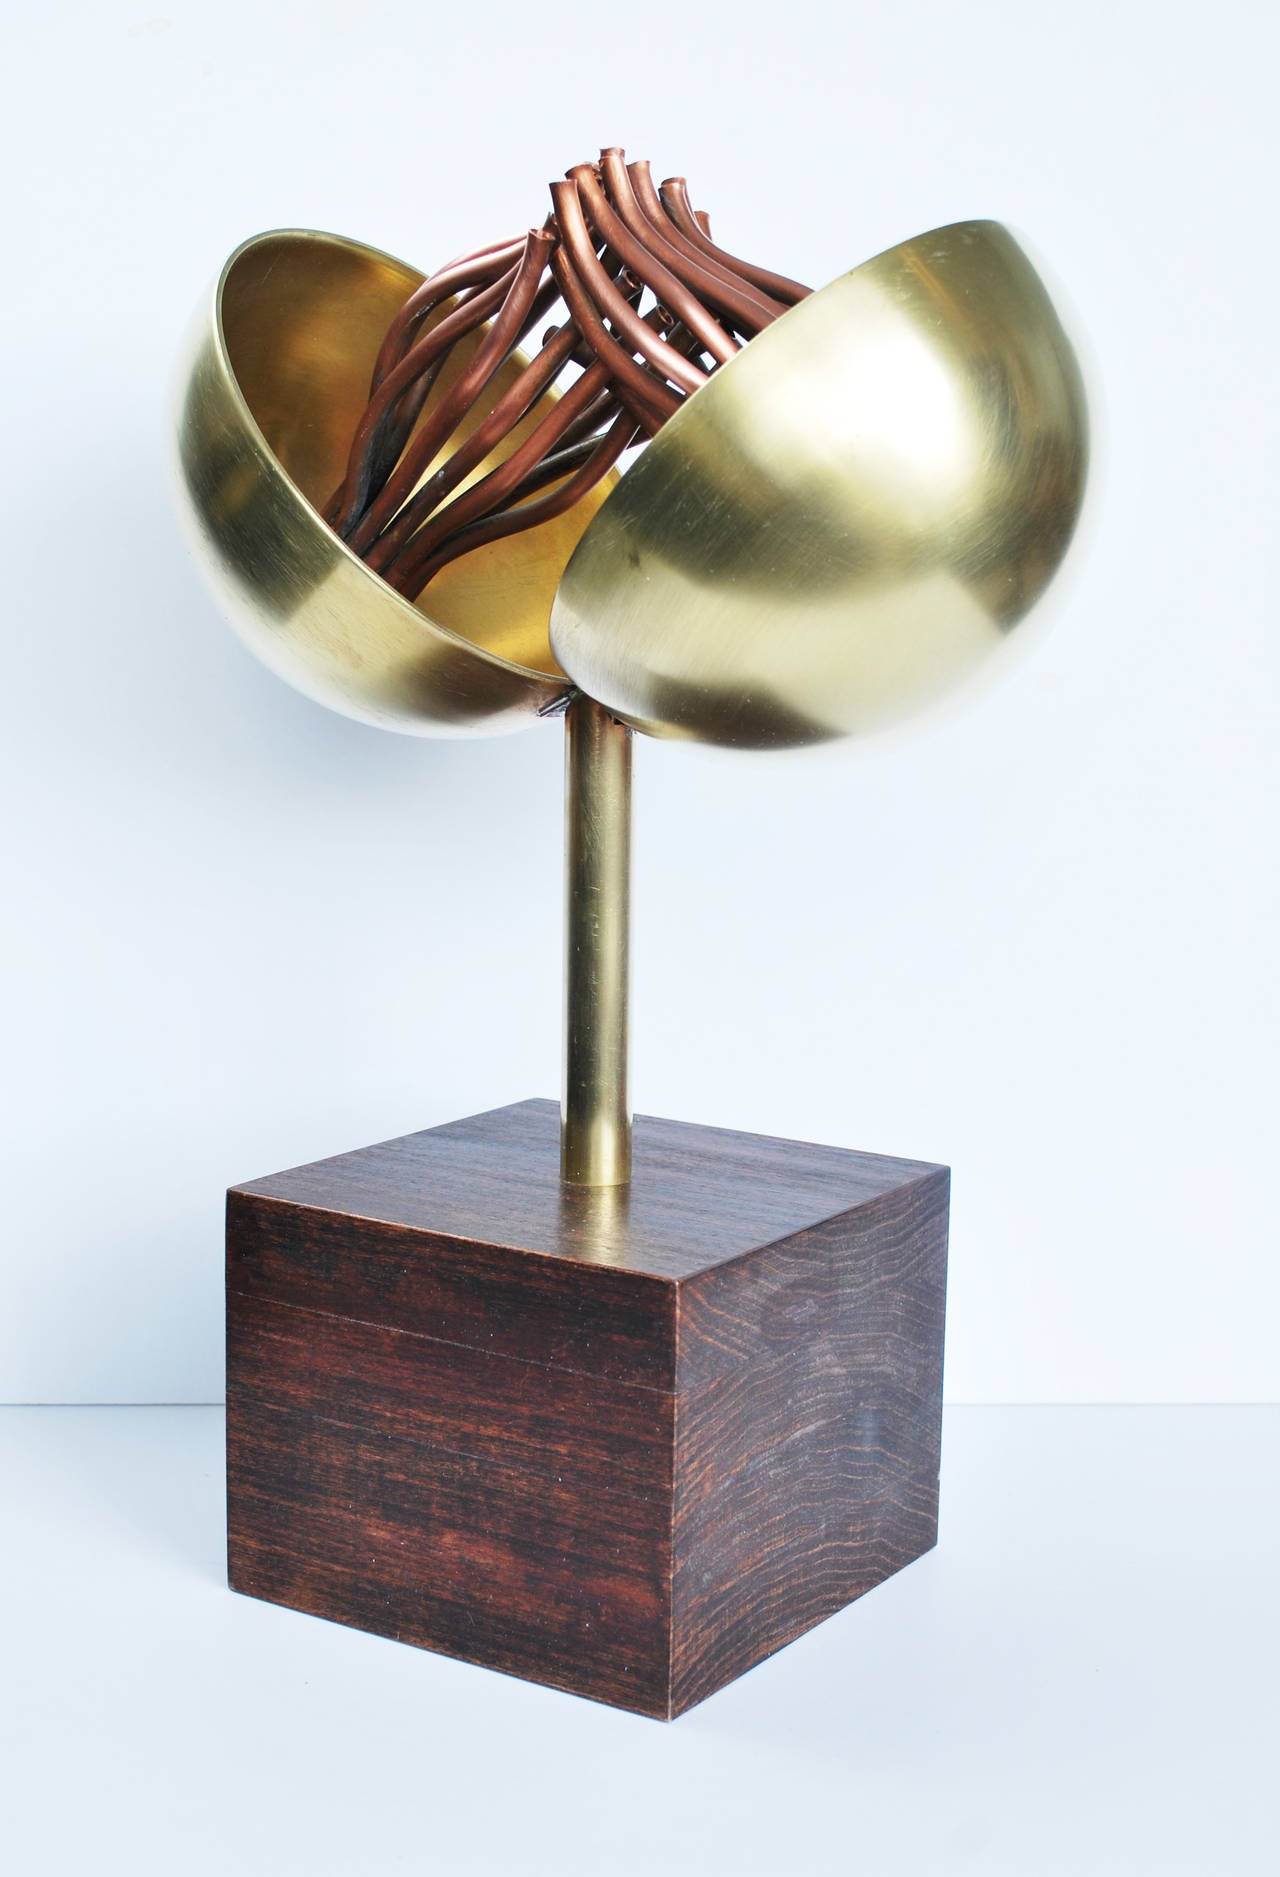 Brass, Copper, Wood, edition of 5, executed 2013.

Dimensions: H 14